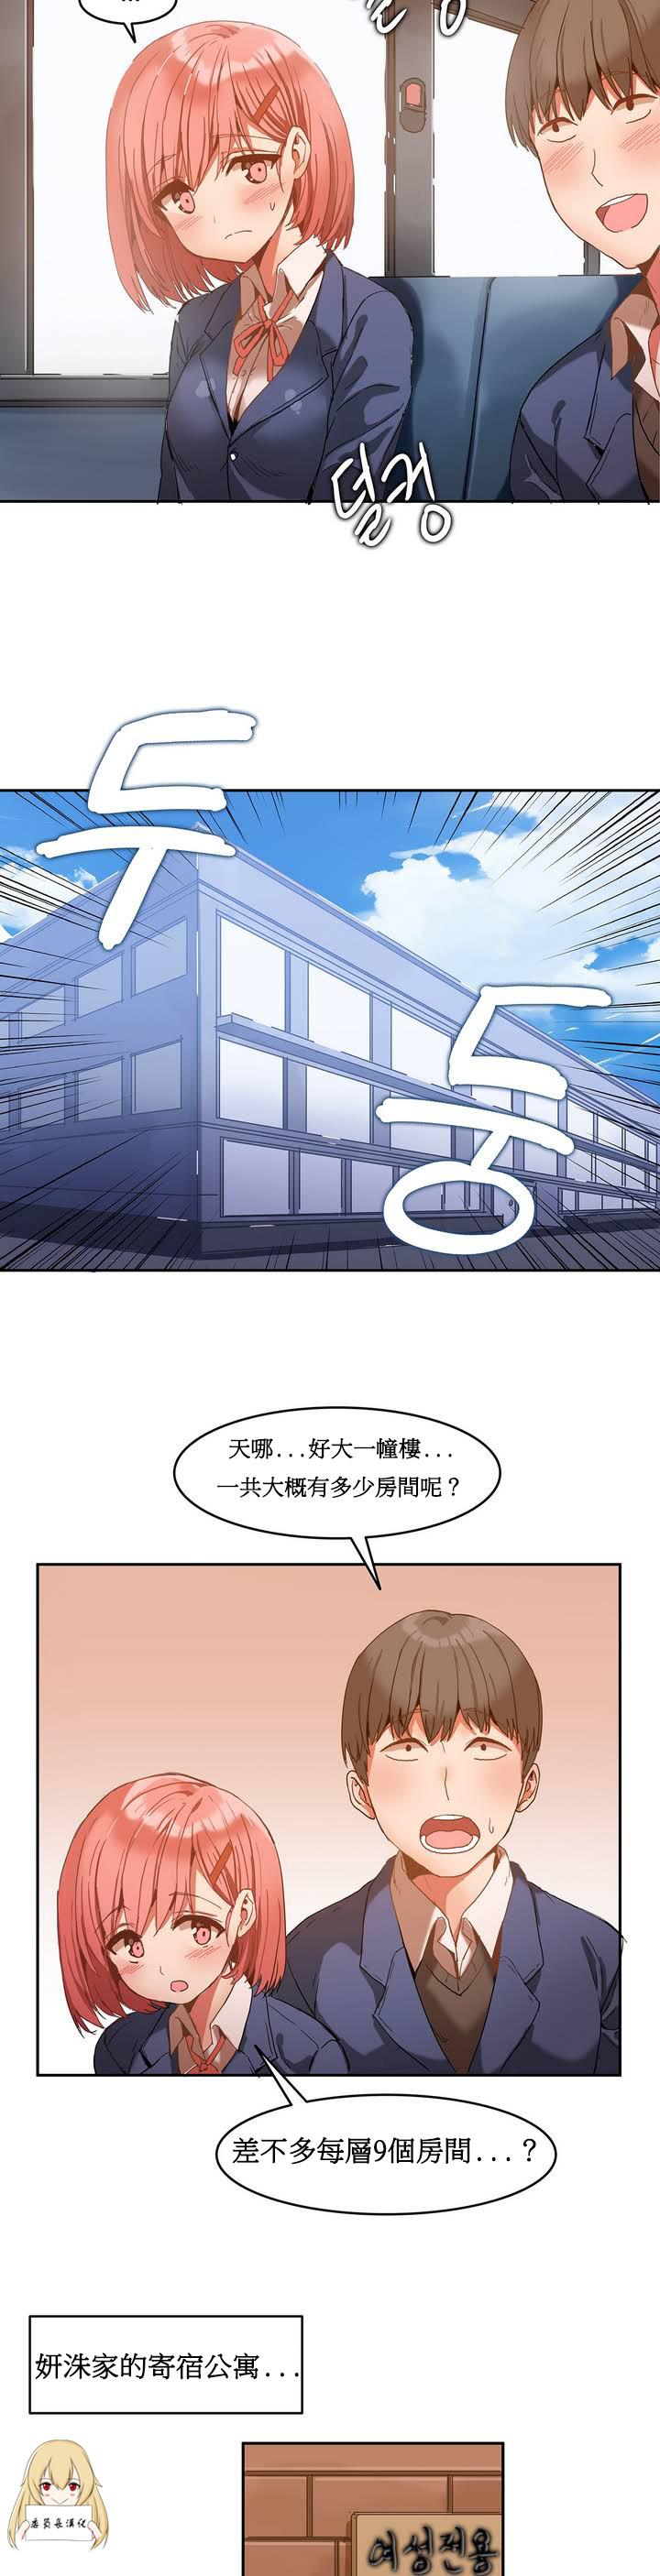 China Hahri's Lumpy Boardhouse Ch. 0~29【委員長個人漢化】（持續更新） Gay Fucking - Page 11